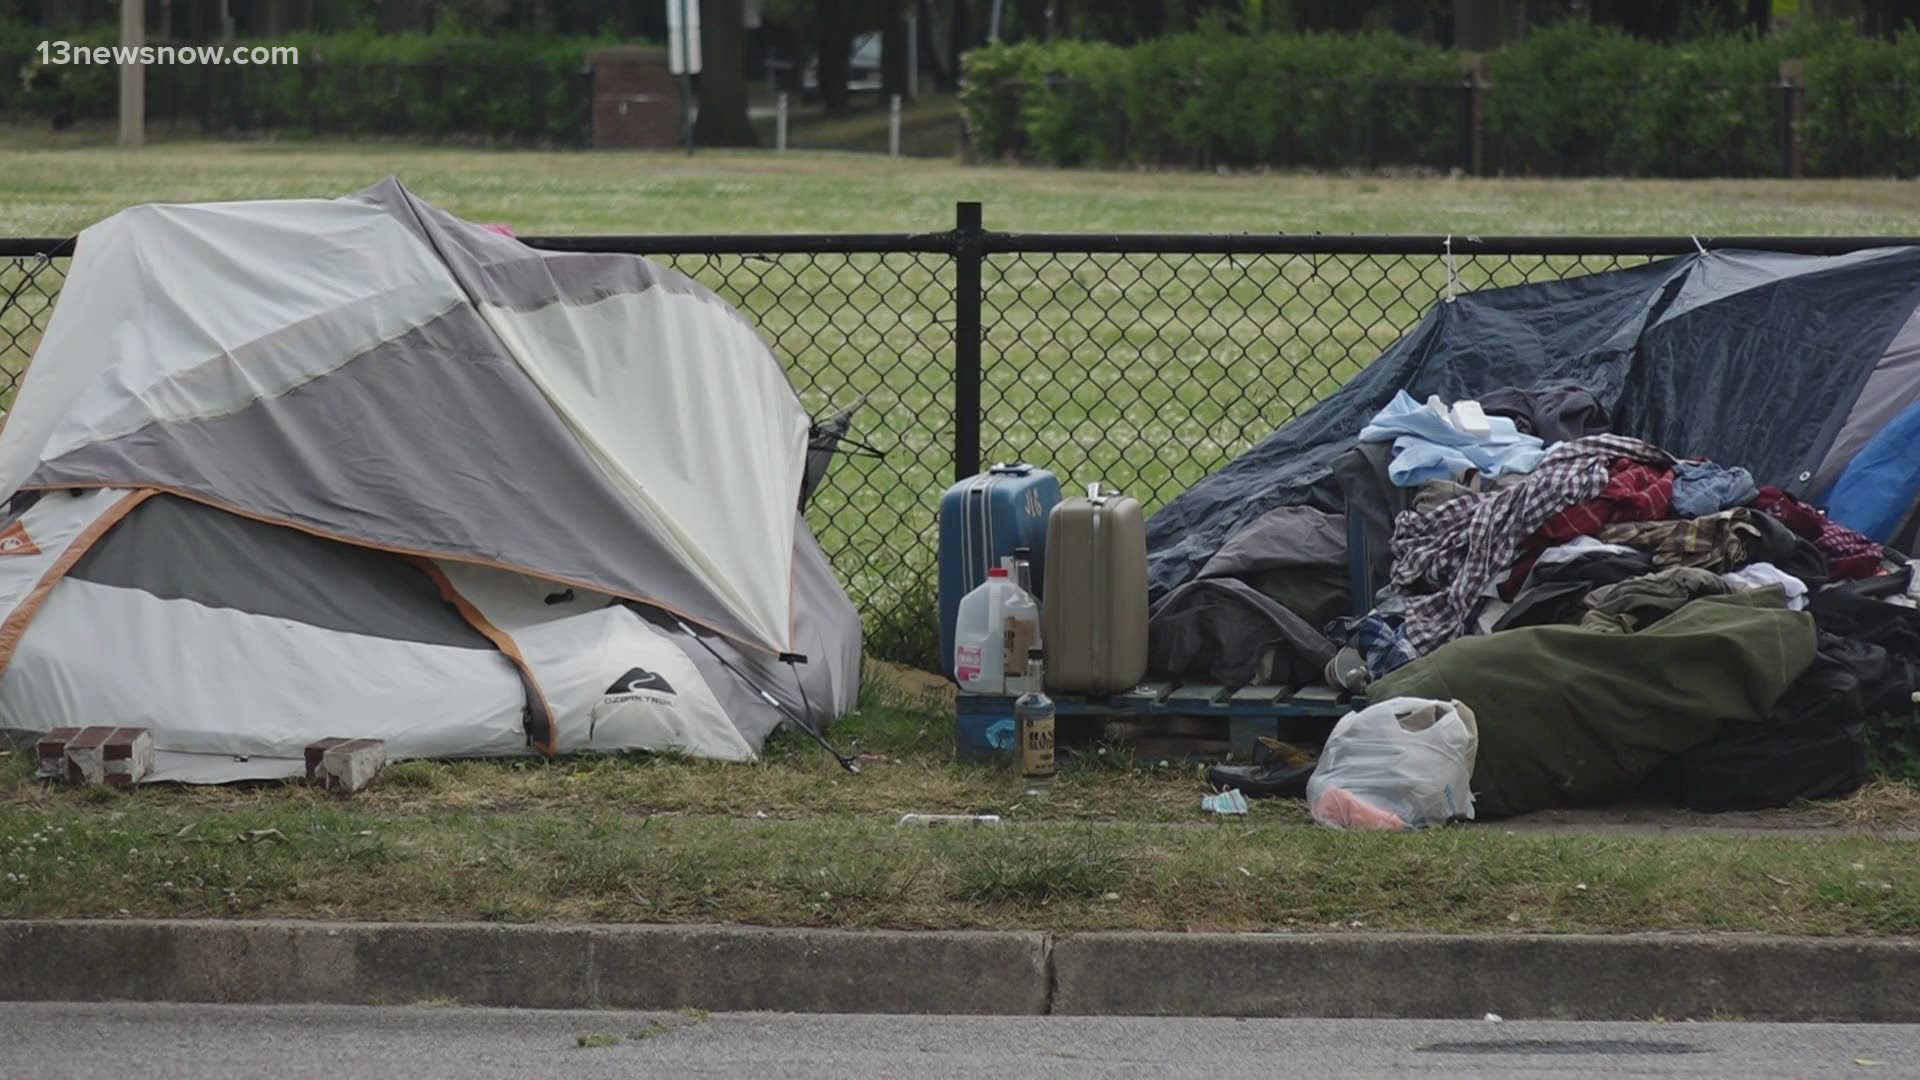 A portion of Norfolk's homeless community was told to leave and go to temporary homeless shelter.